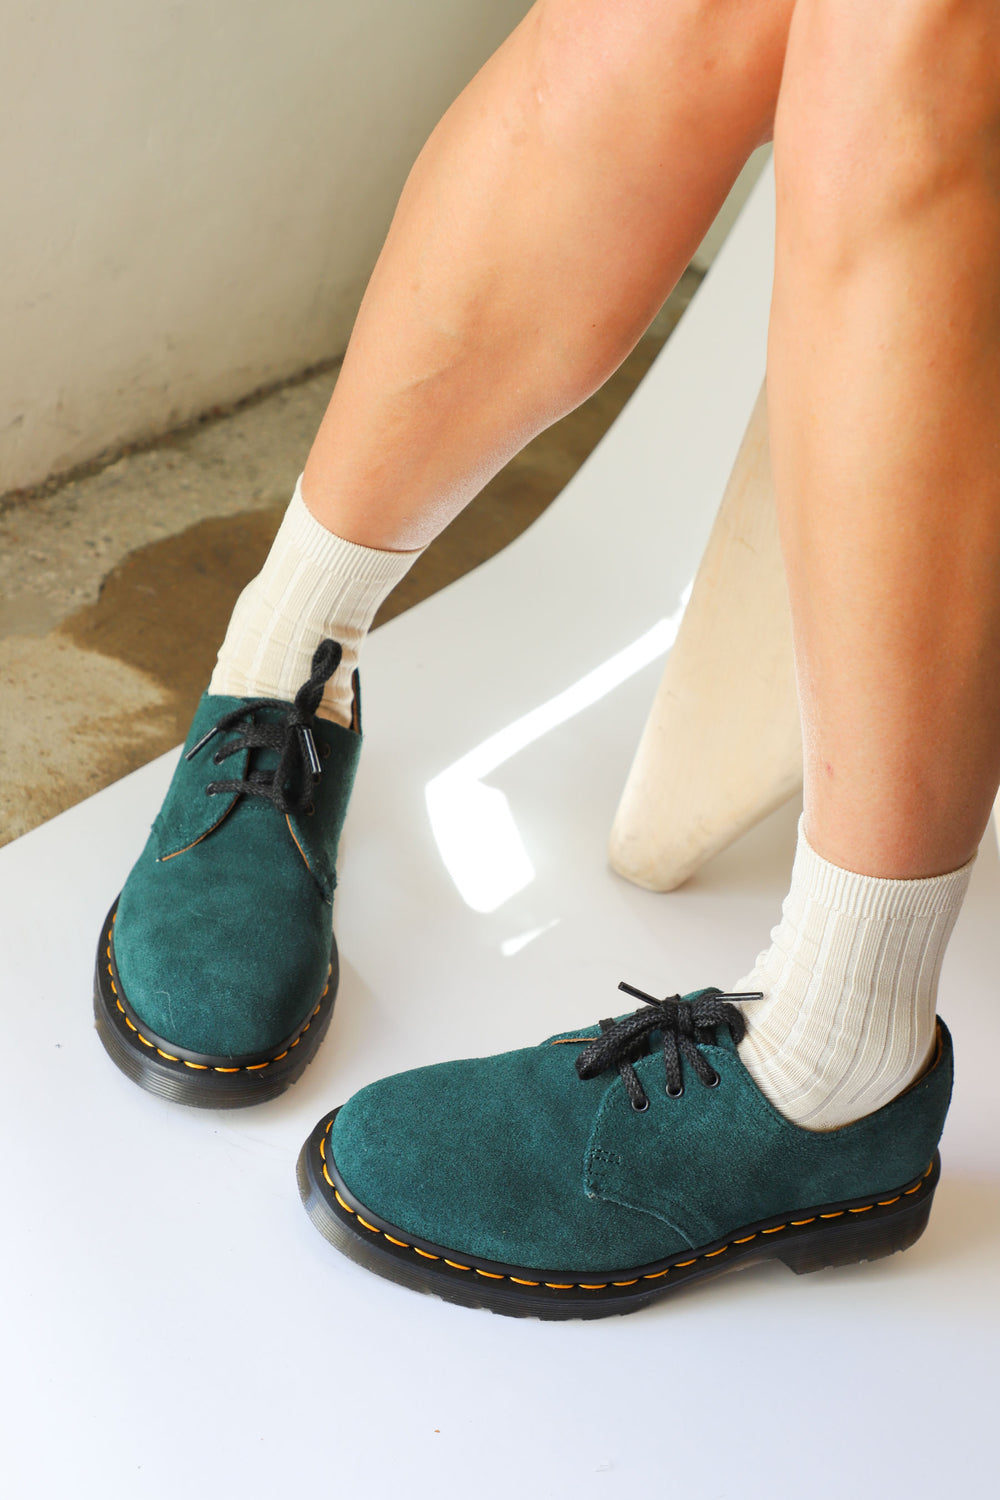 Racer Green Suede 1461 Oxford